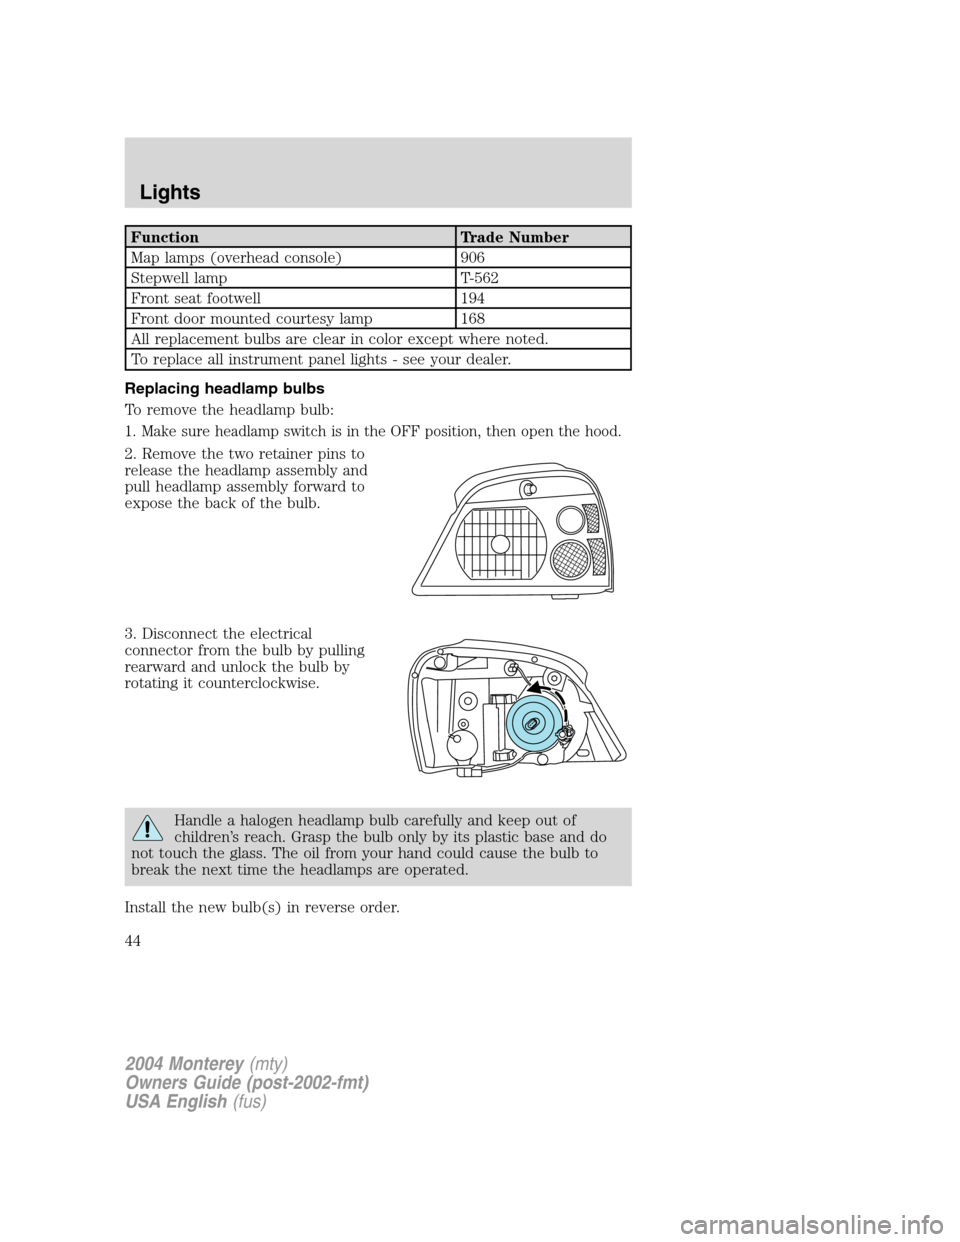 Mercury Monterey 2004  s Service Manual Function Trade Number
Map lamps (overhead console) 906
Stepwell lamp T-562
Front seat footwell 194
Front door mounted courtesy lamp 168
All replacement bulbs are clear in color except where noted.
To 